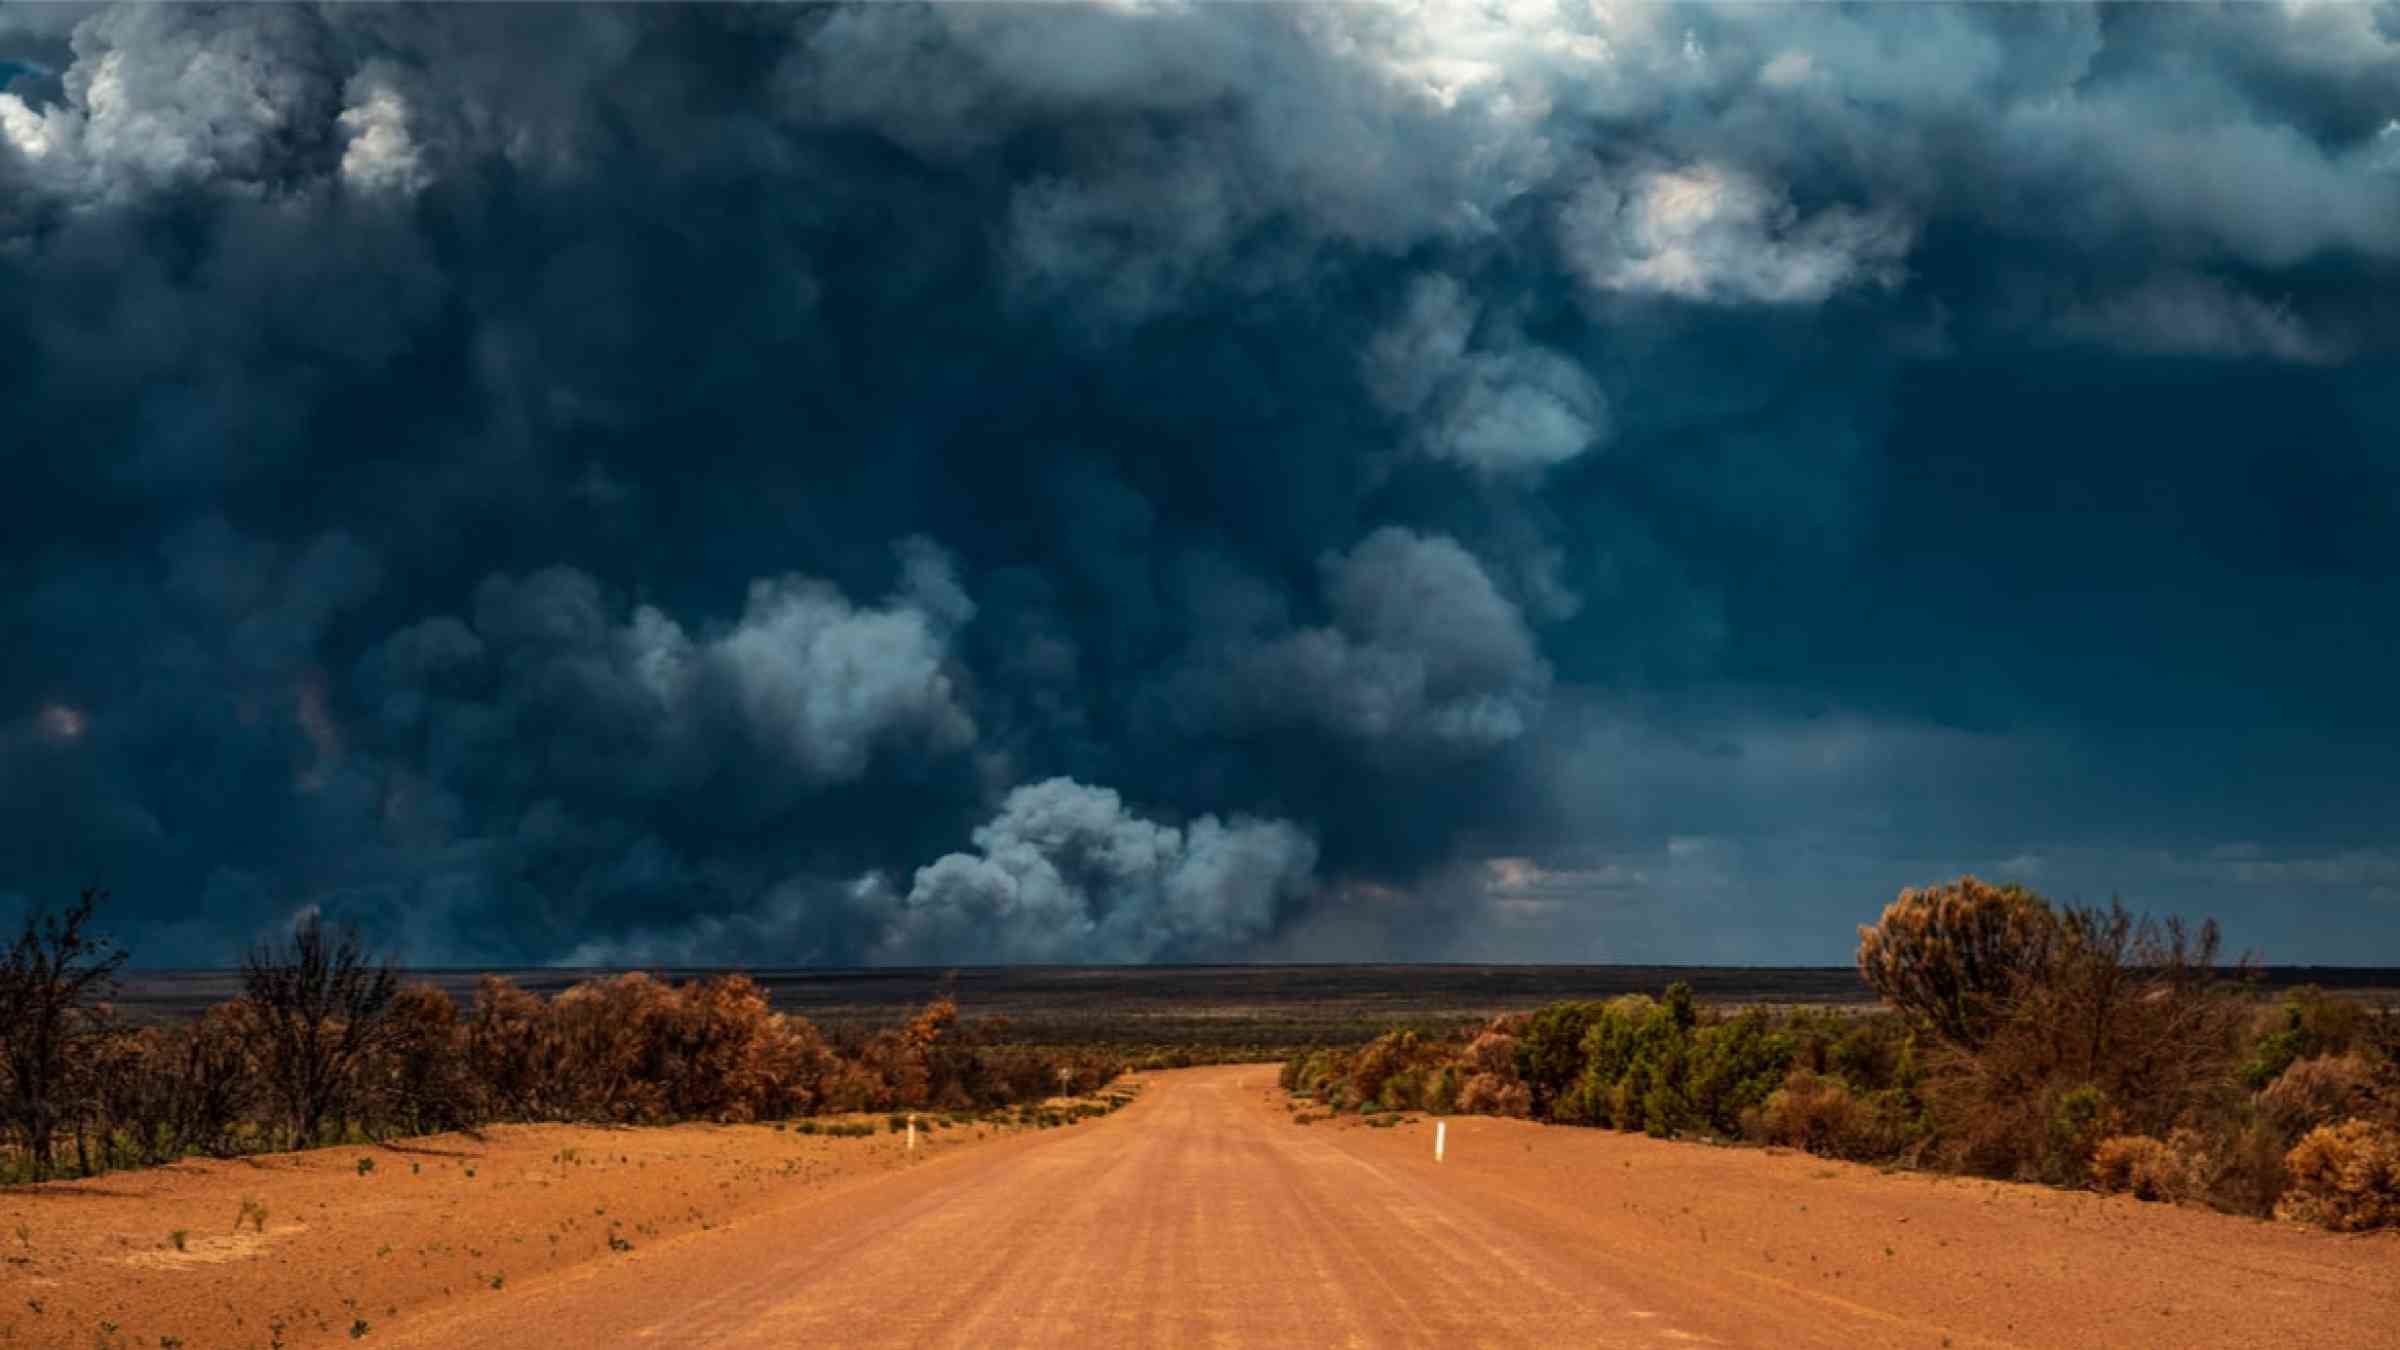 Smoke from bushfires at a distance in a rural scenery